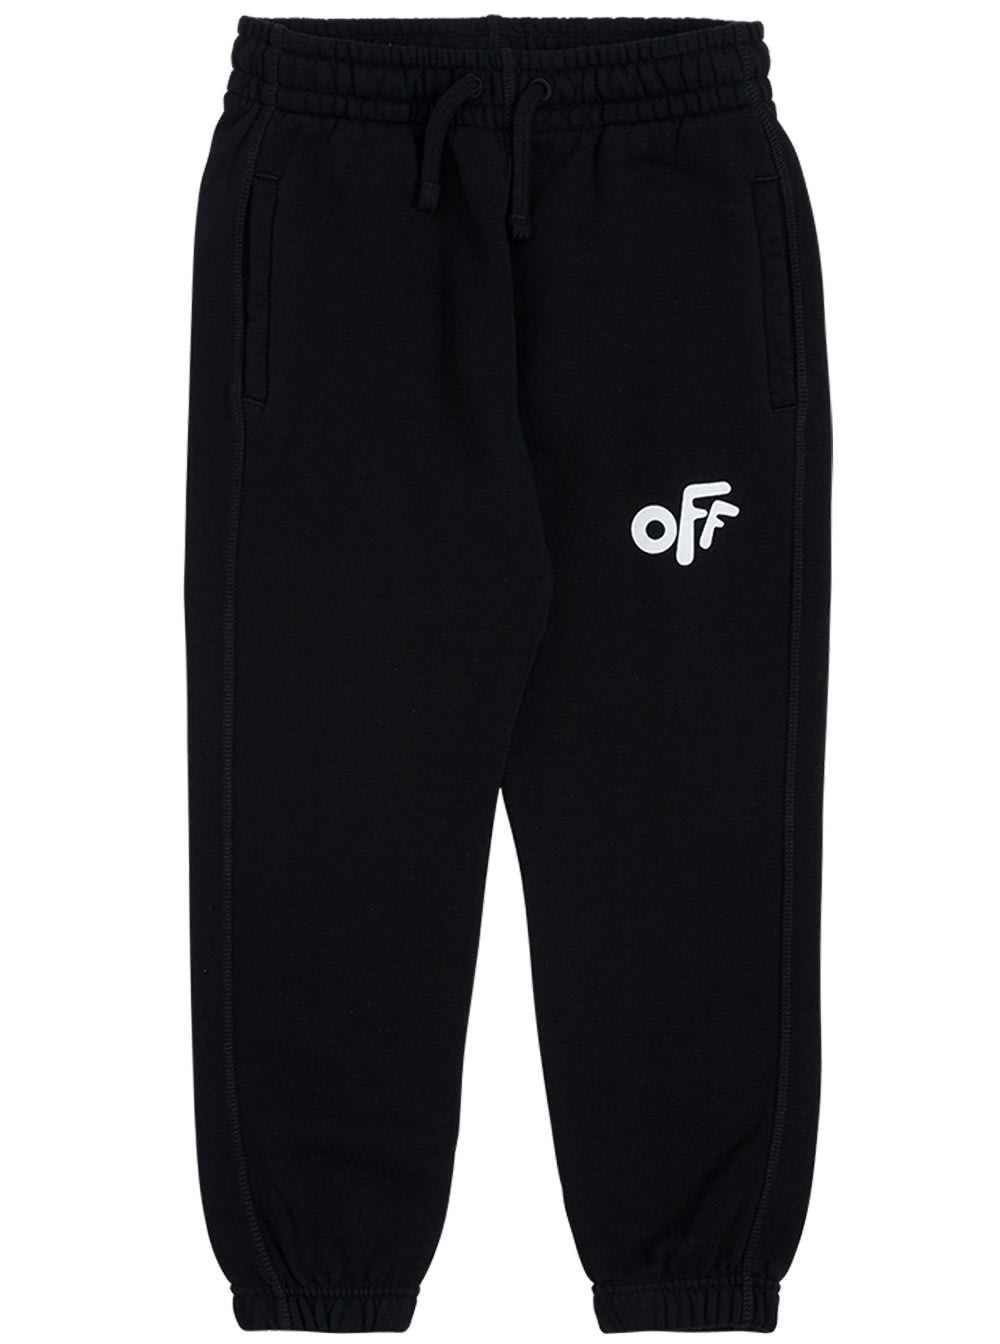 Off-White Black Cotton Joggers With Off Print